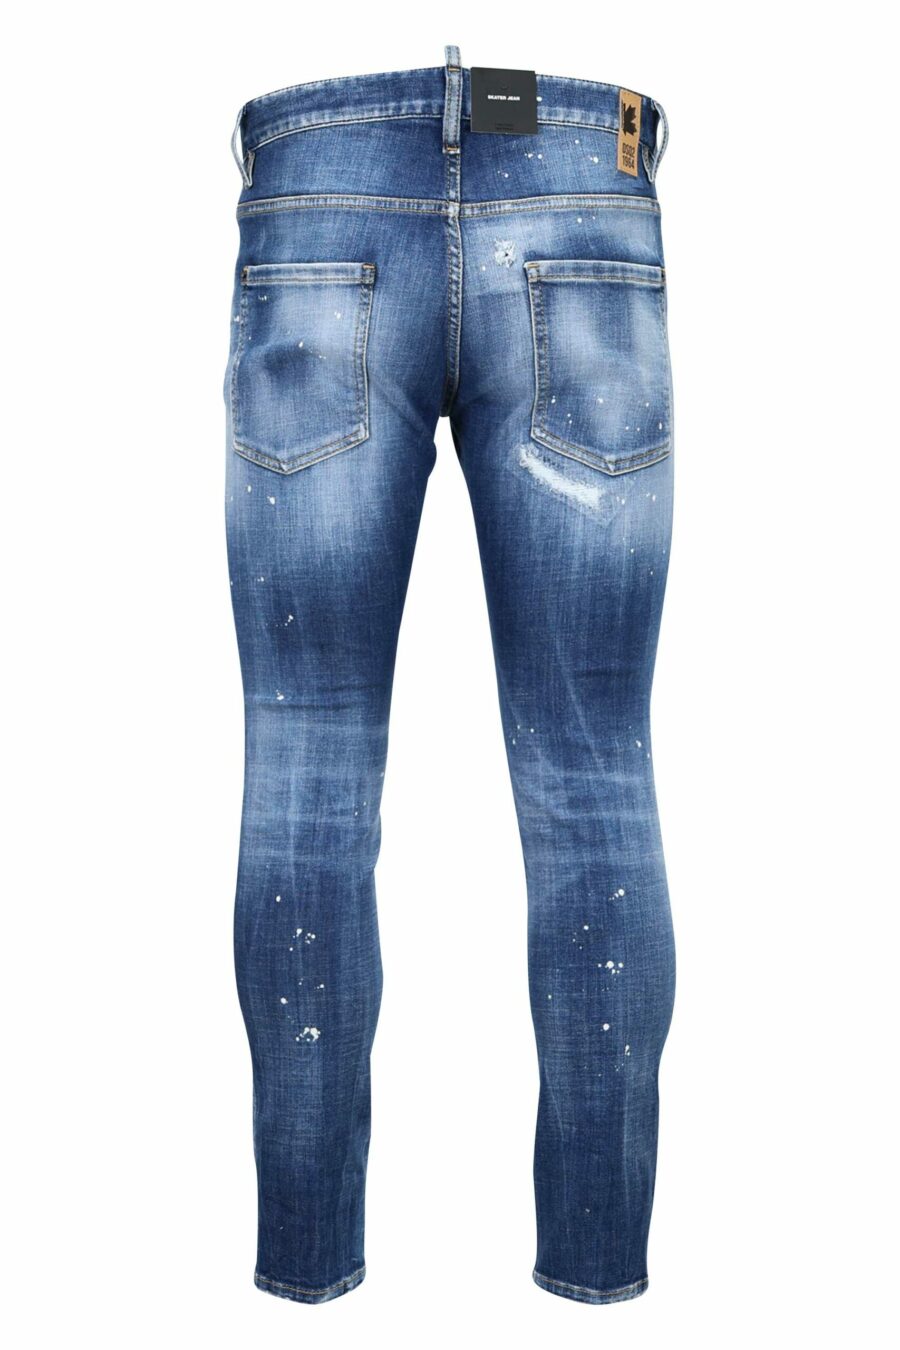 Skater jean light blue jeans with rips and tears - 8052134939482 3 1 scaled